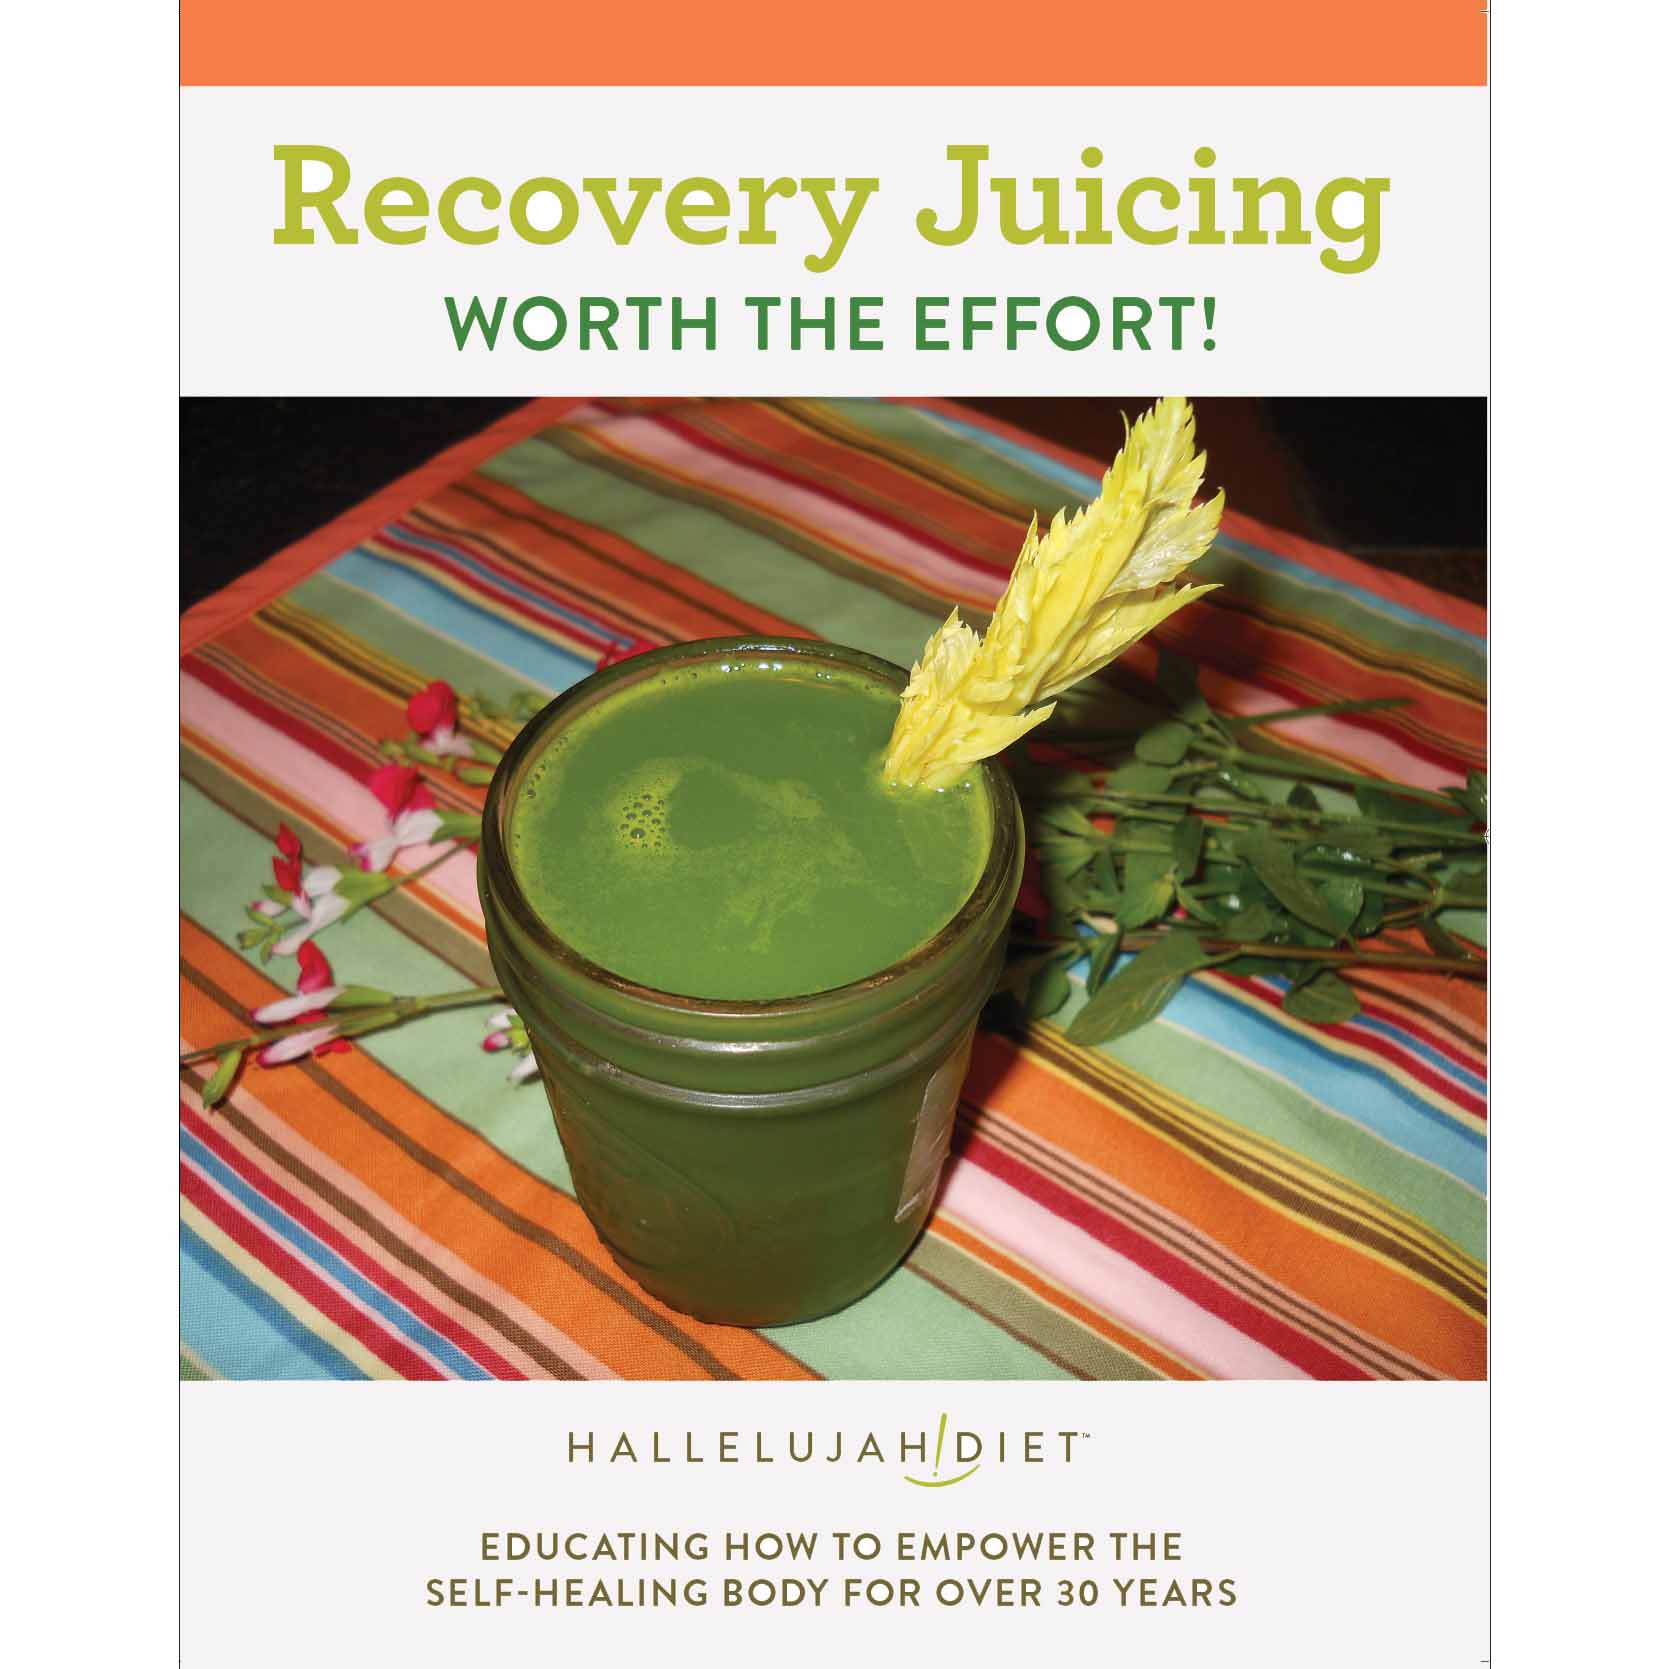 Recovery Juicing: Worth the effort!